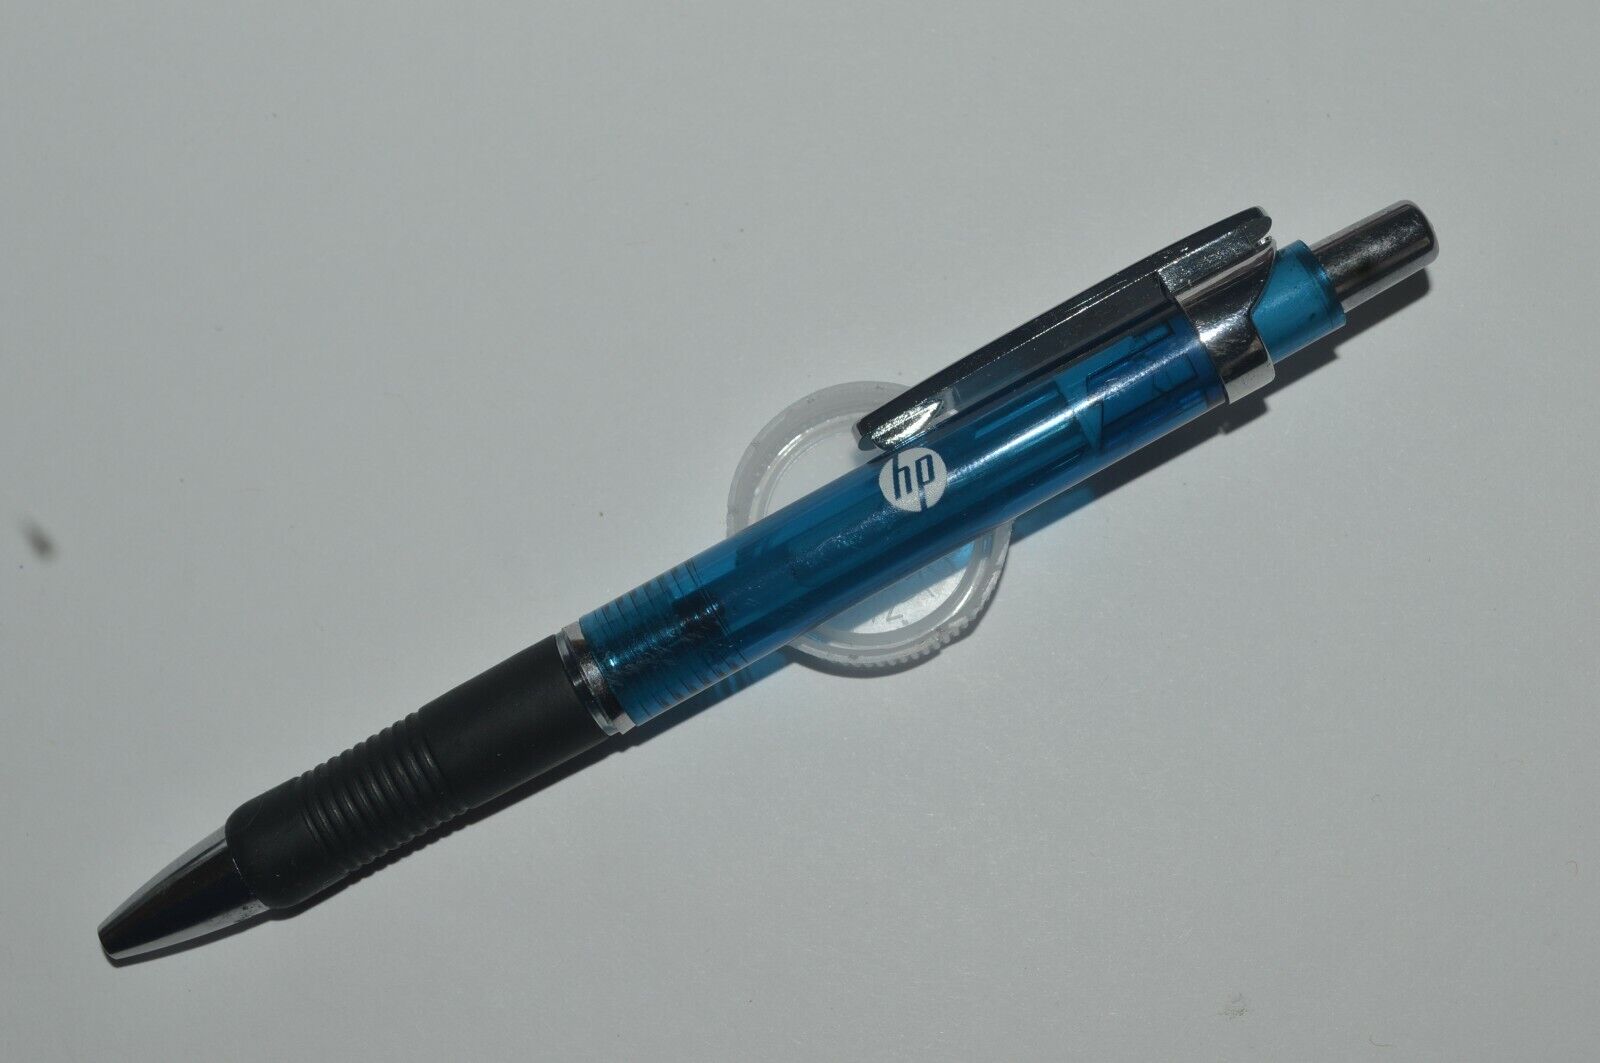 HP Promotional Ballpoint Pen Blue Color Soft Grip Used Very Good Conditions 